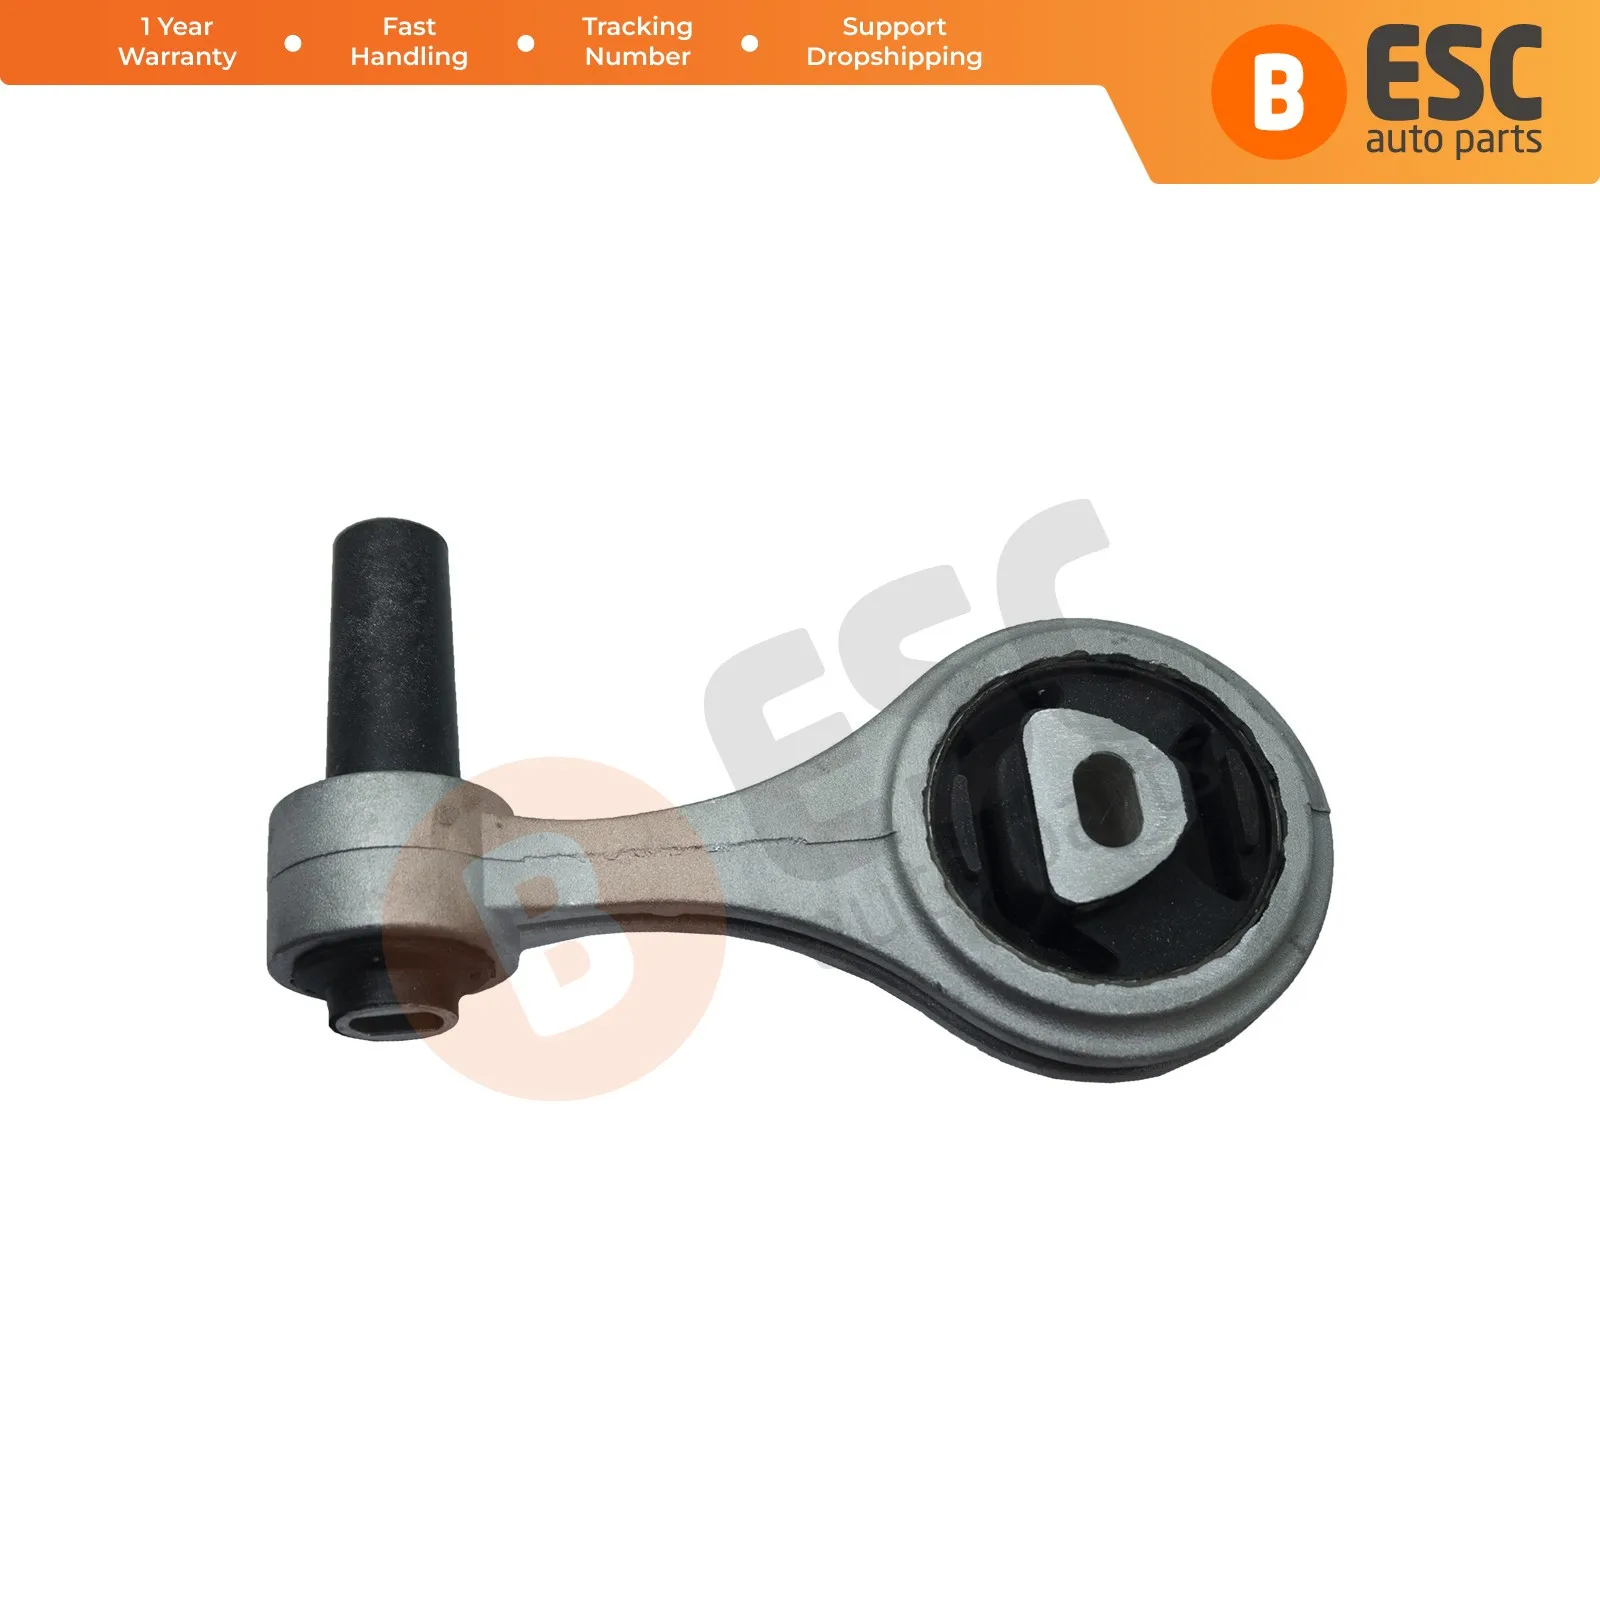 

ESC Auto Parts ESP911 Engine Mounting Transmission End 51837816 for Fiat Fast Shipment Free Shipment Ship From Turkey